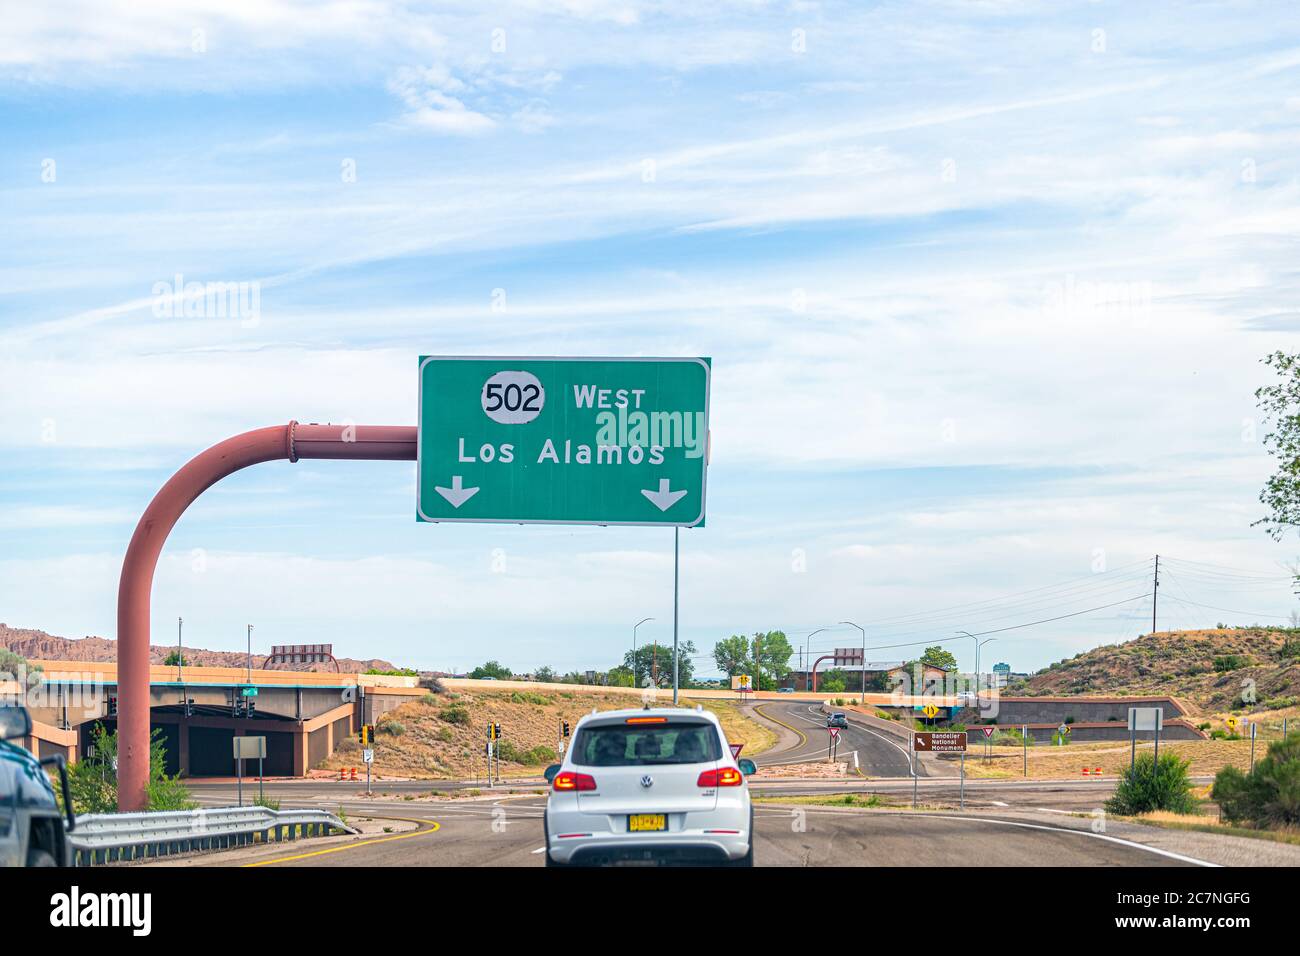 Santa Fe, USA - June 17, 2019: New Mexico desert with cars on road highway sign to Los Alamos driving with street 502 west Stock Photo